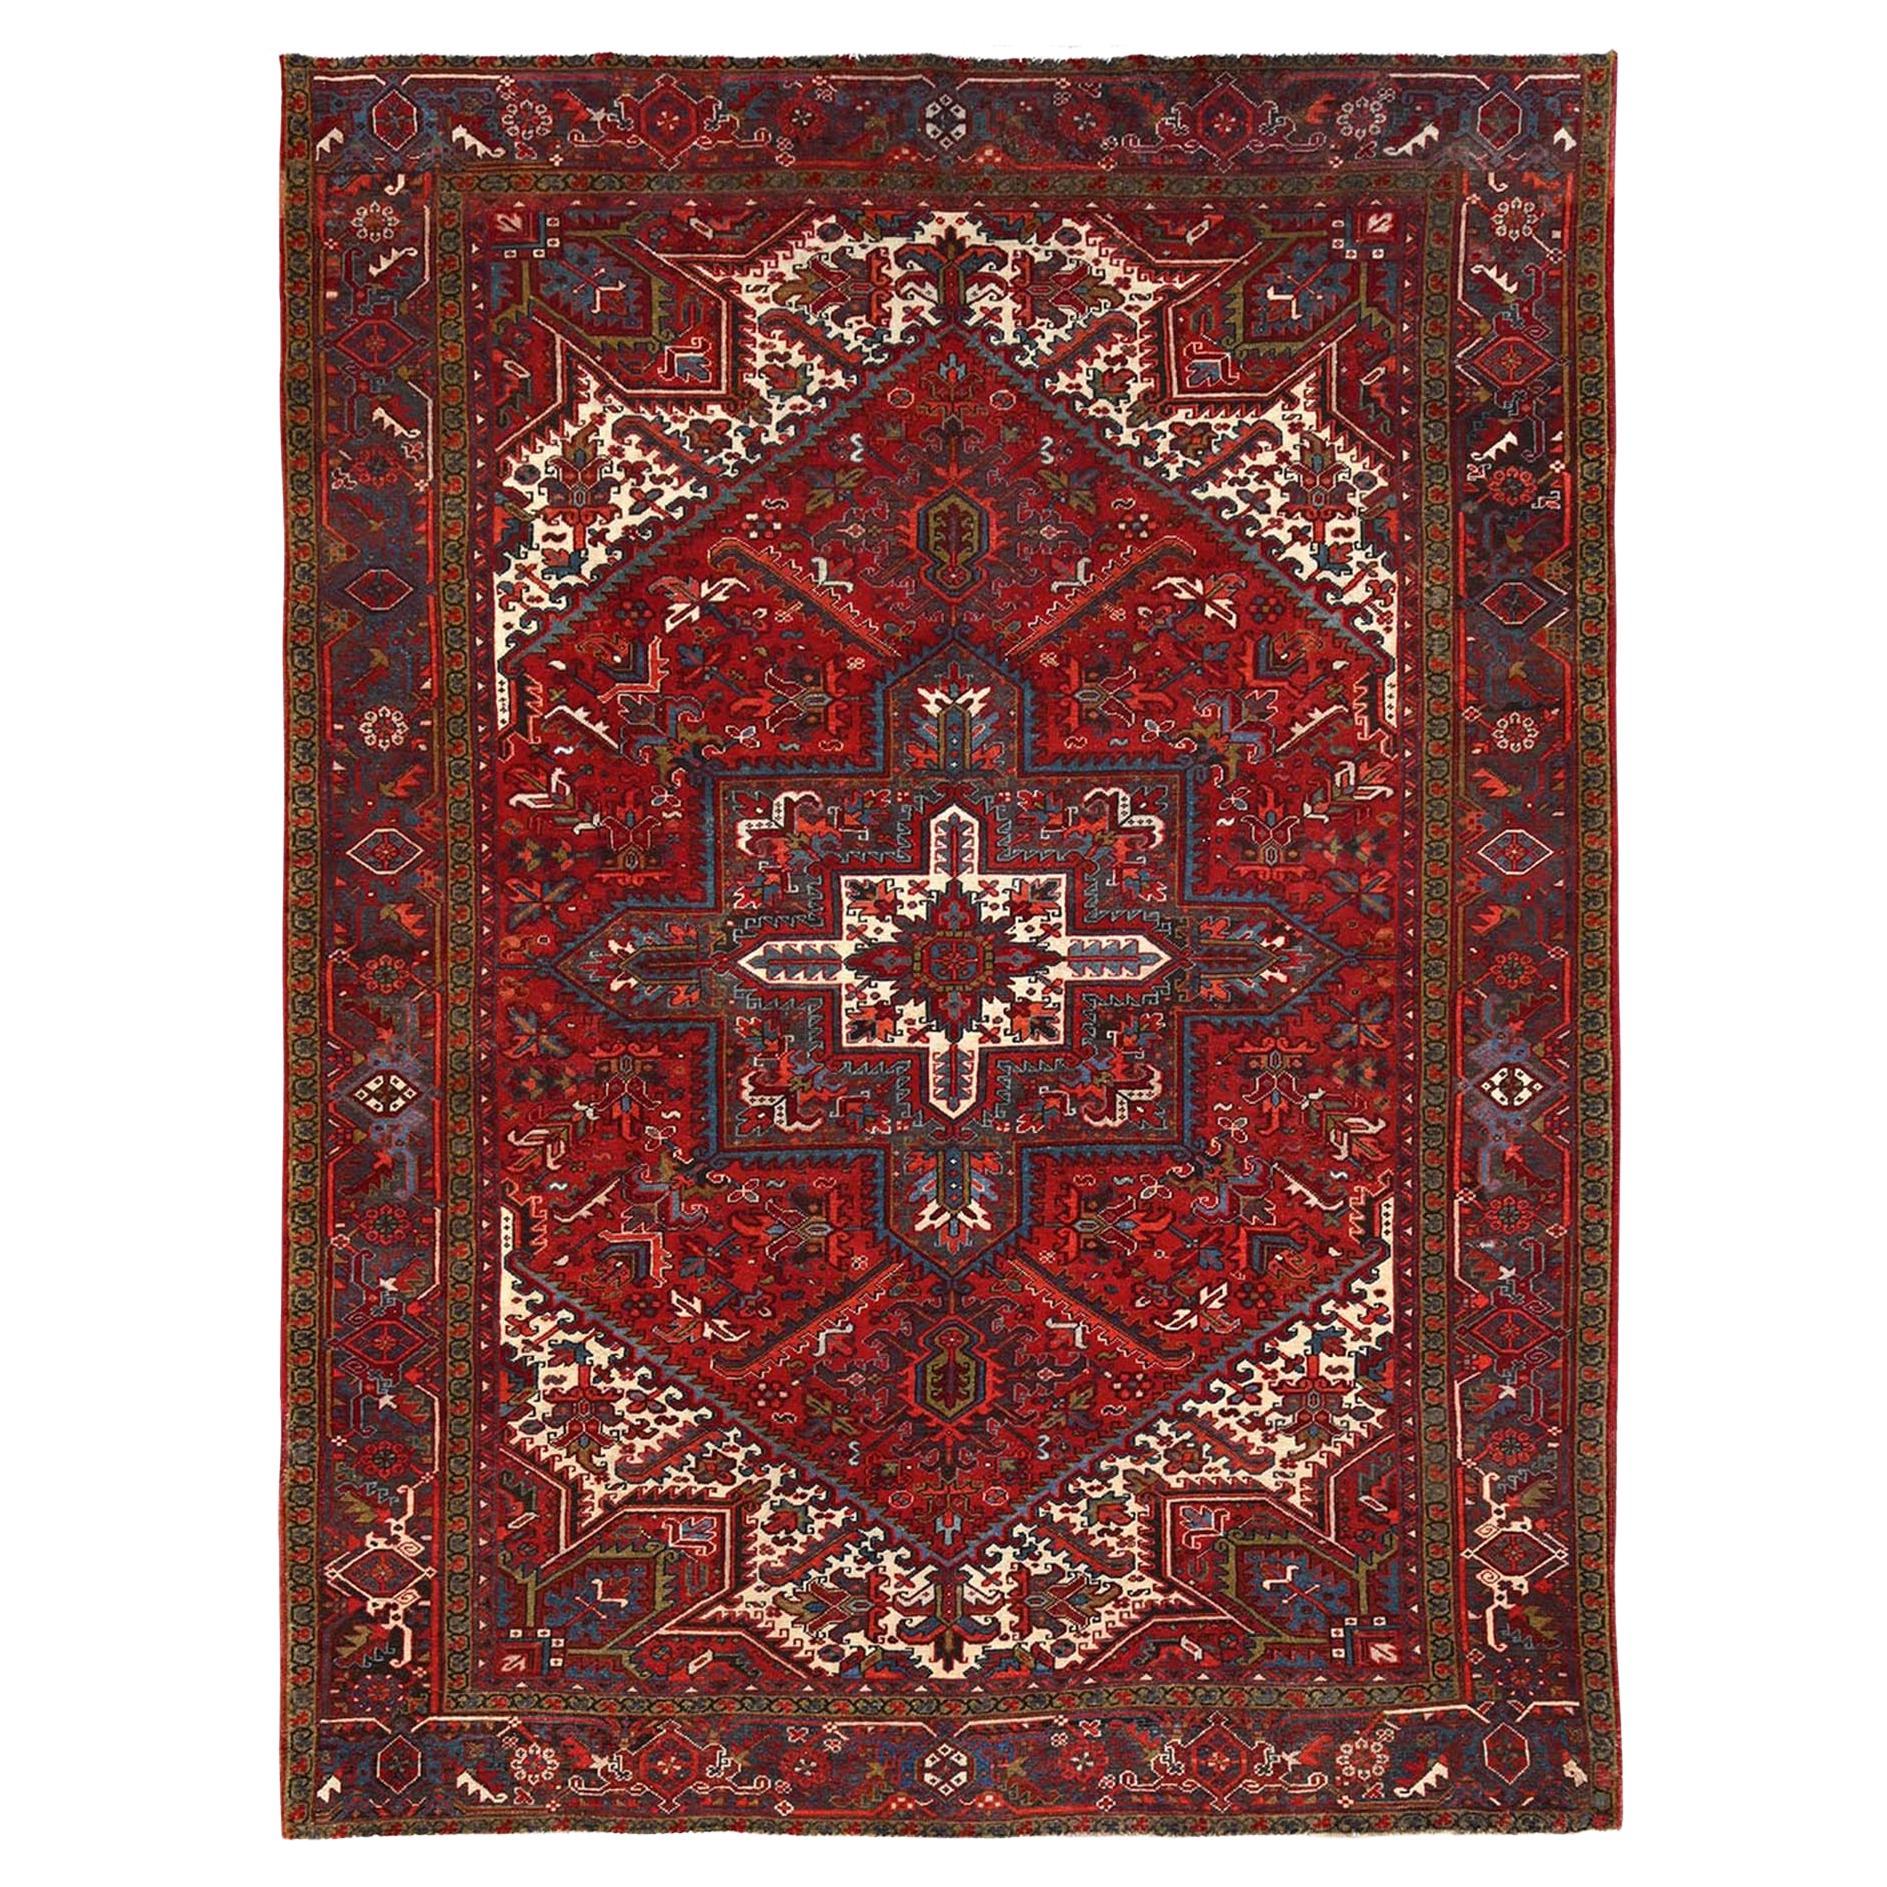 Red Distressed Feel Evenly Worn Pure Wool Hand Knotted Vintage Persian Heriz Rug